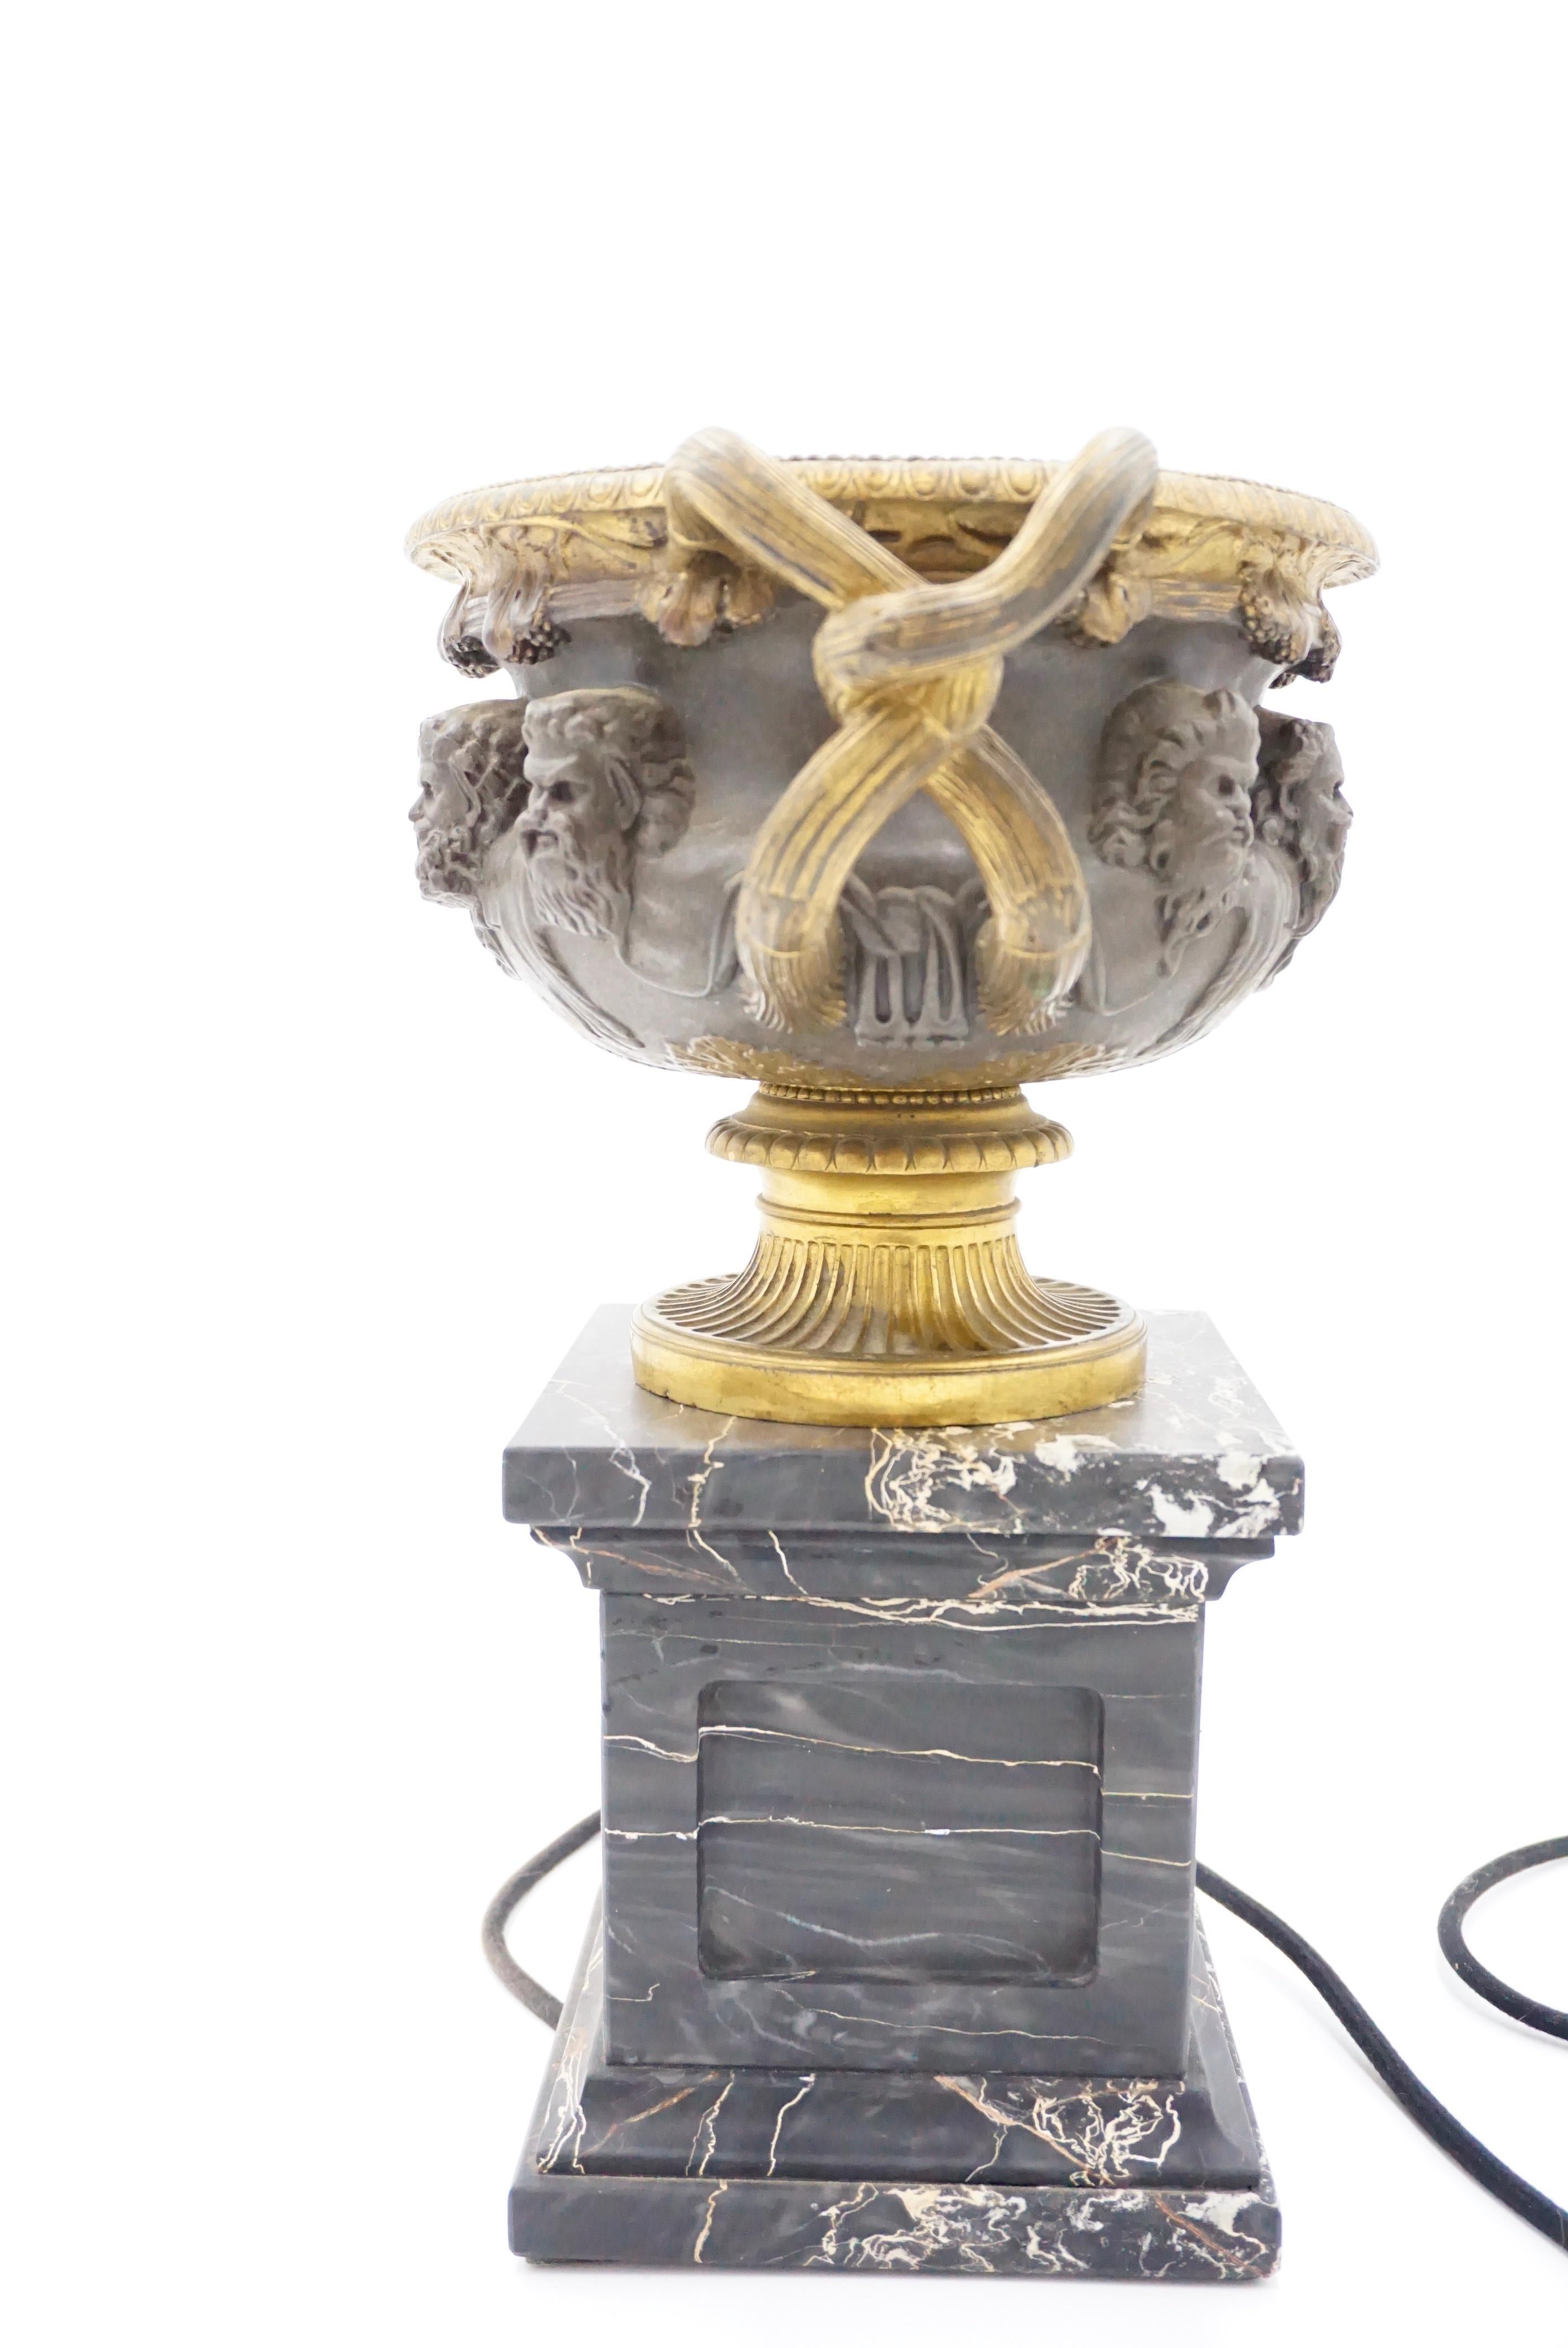 Bronze and Gilt Warwick Vase Lamp on Portoro Marble Basis, by Barbadienne, 1860 For Sale 4